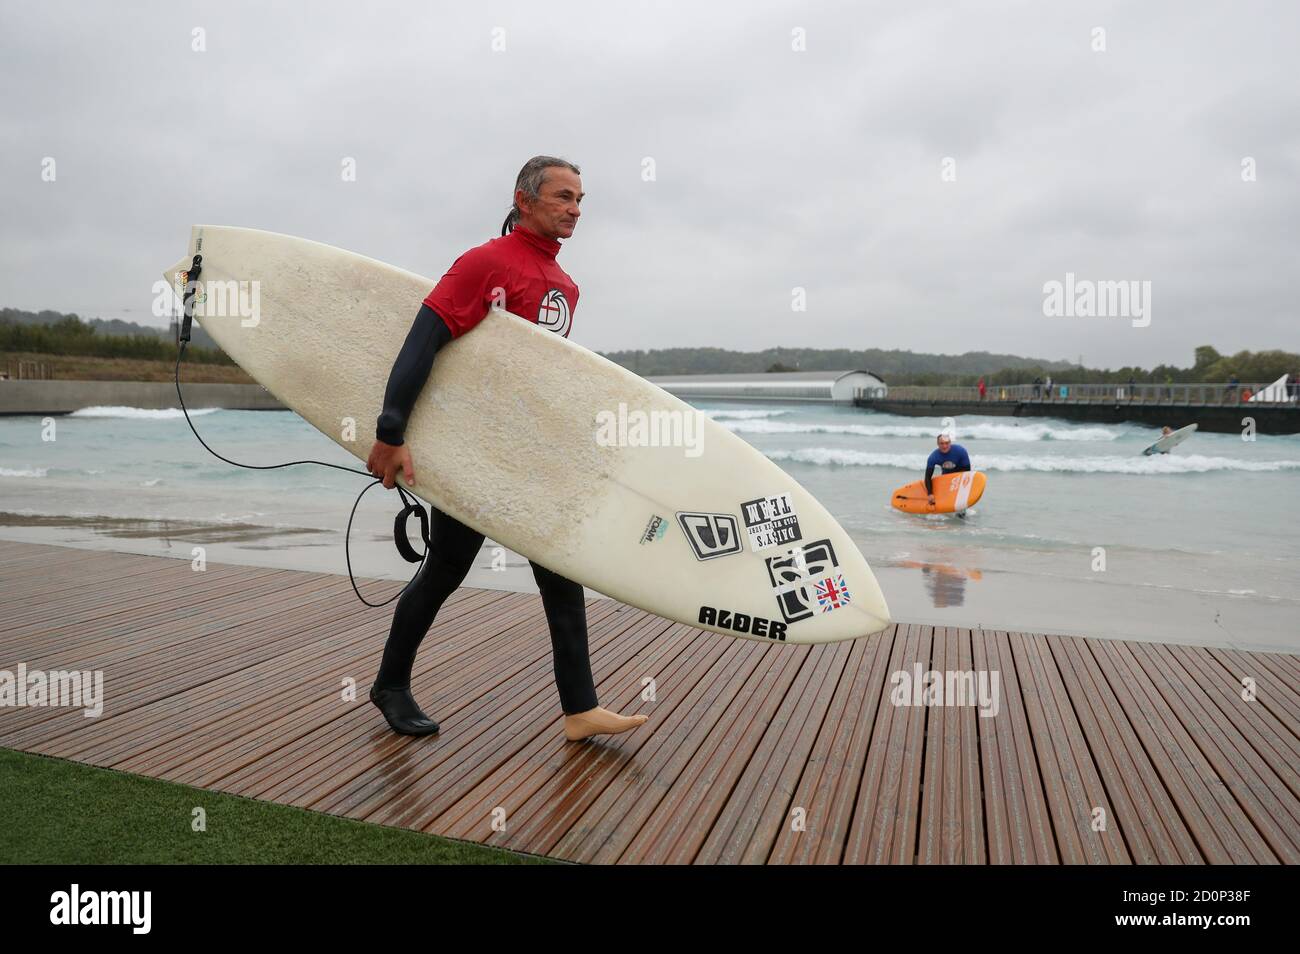 Pegleg Bennett leaves the water after taking part in the 2020 Korev Lager English Adaptive Surfing Open at The Wave in Bristol. Stock Photo